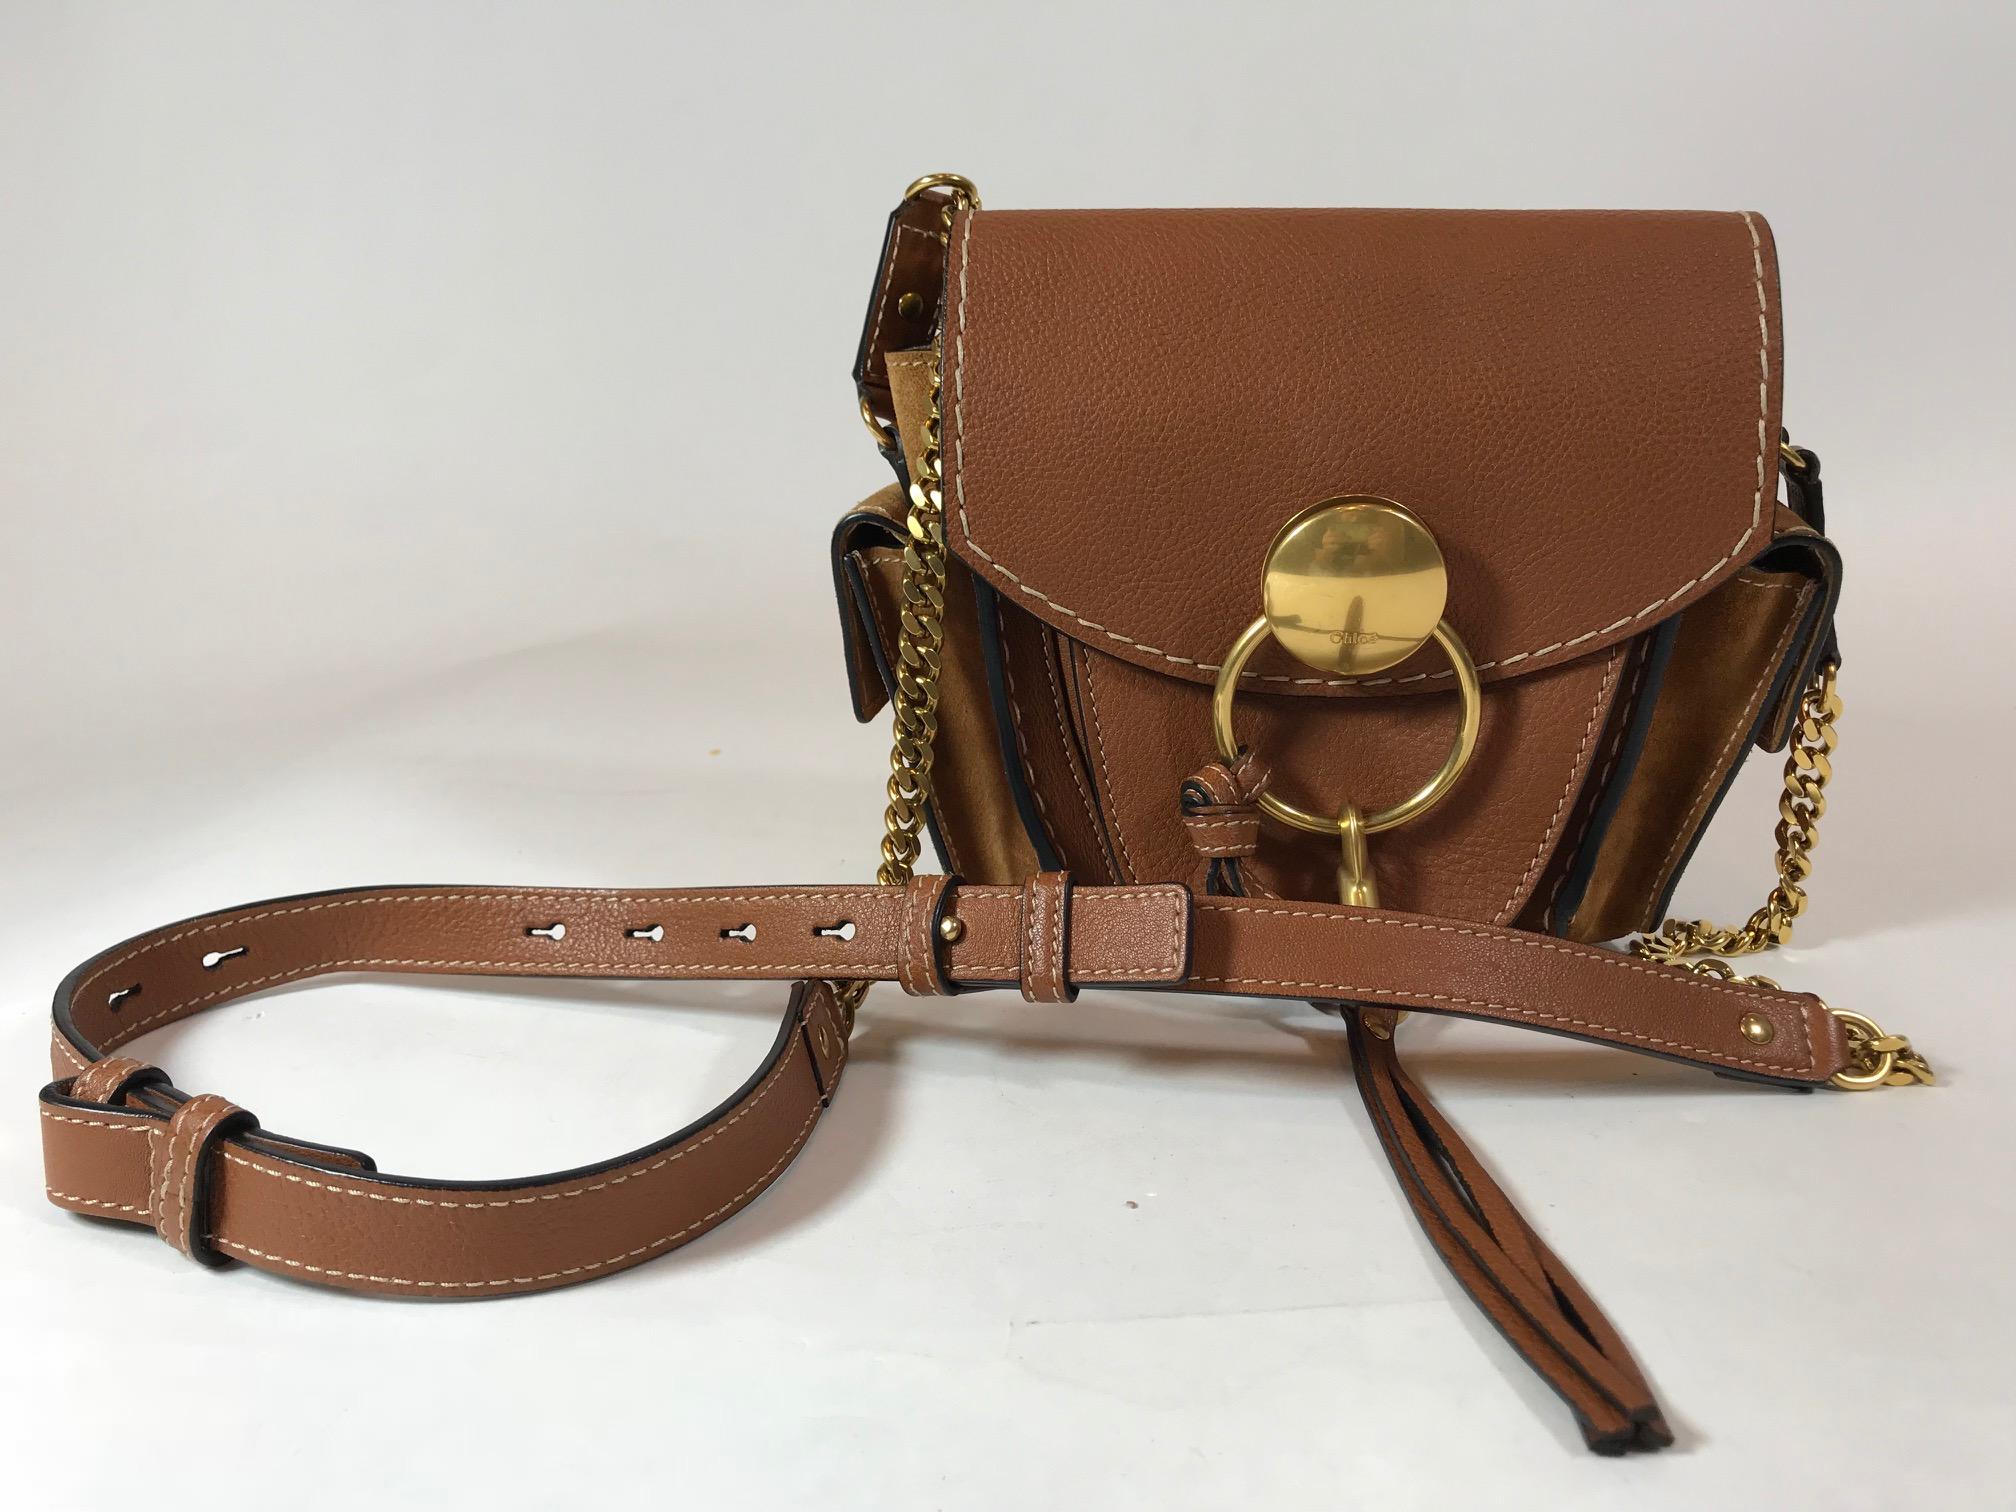 Brown grained leather. Gold-tone hardware. Magnetic snap closure at front flap. Tonal suede accents. Adjustable flat shoulder strap with chain-link accents. Dual exterior pockets with magnetic snap closures. Single slit pocket at flap underside.